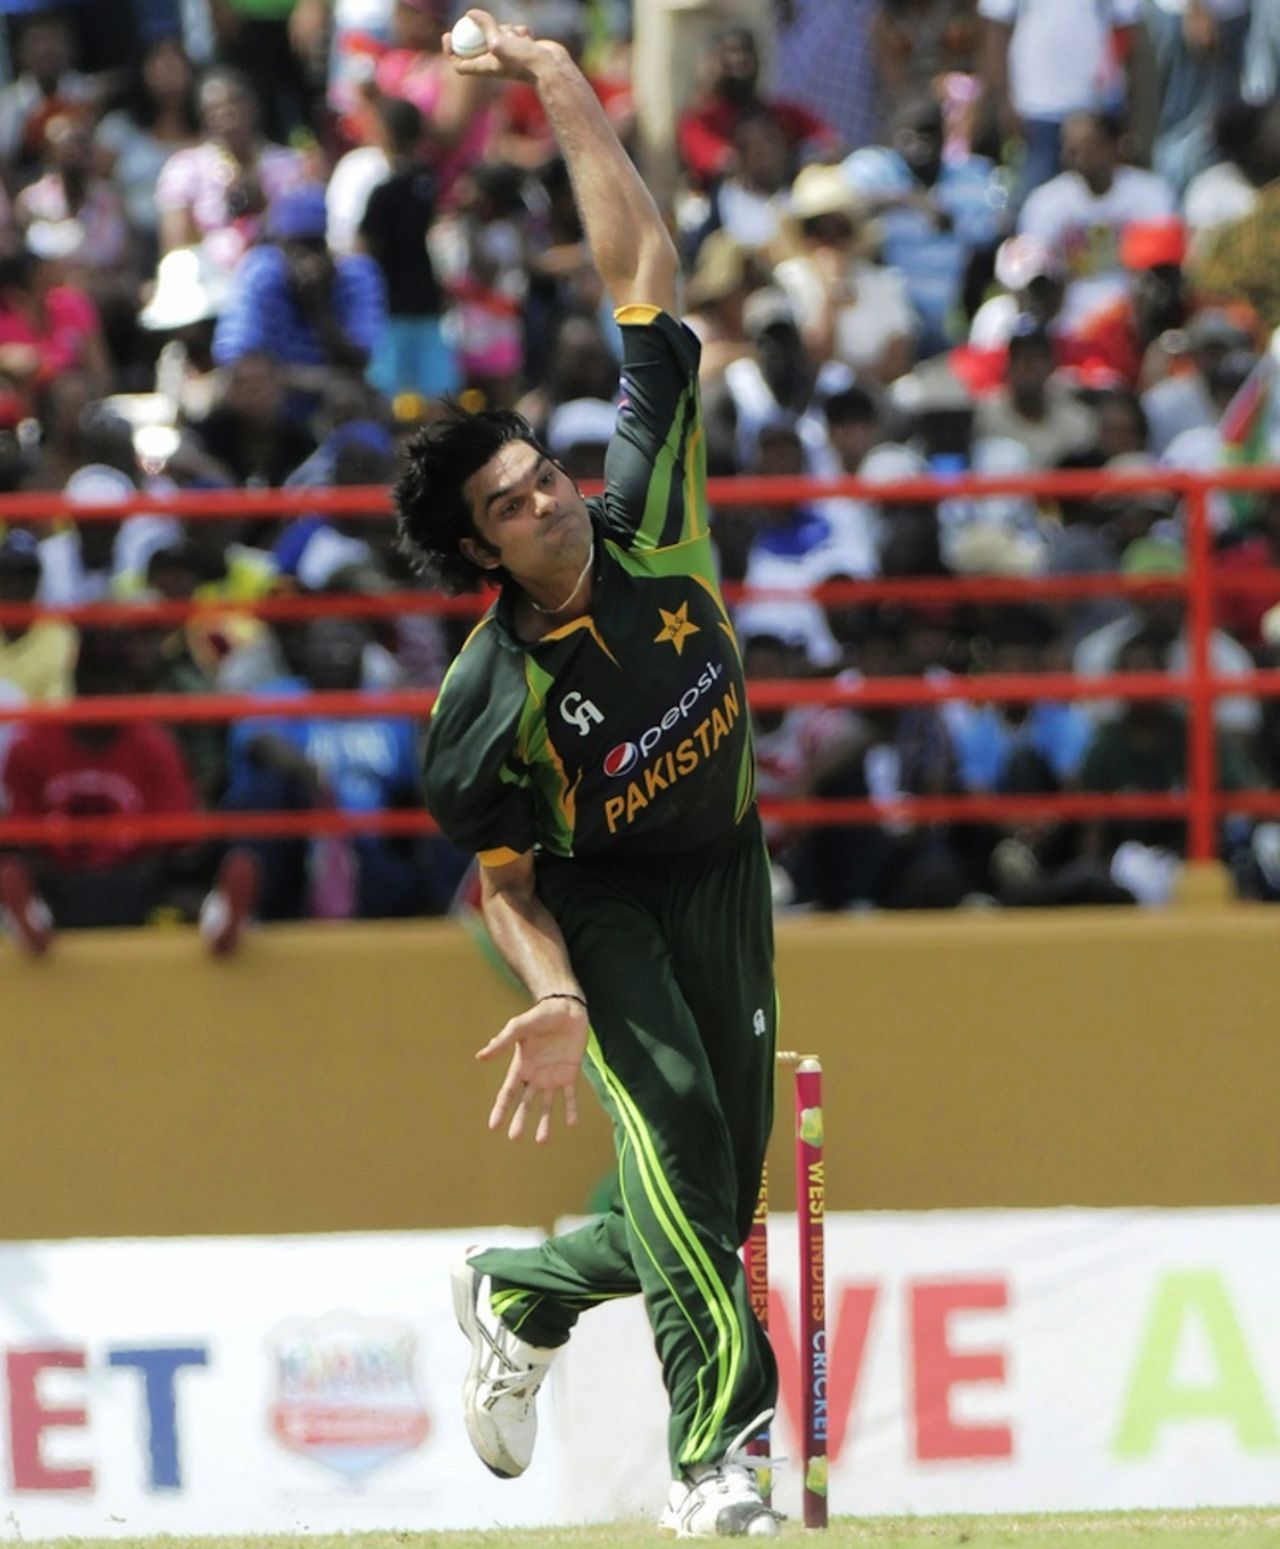 Mohammad Irfan took a wicket in his first over, West Indies v Pakistan, 1st ODI, Providence, July 14, 2013